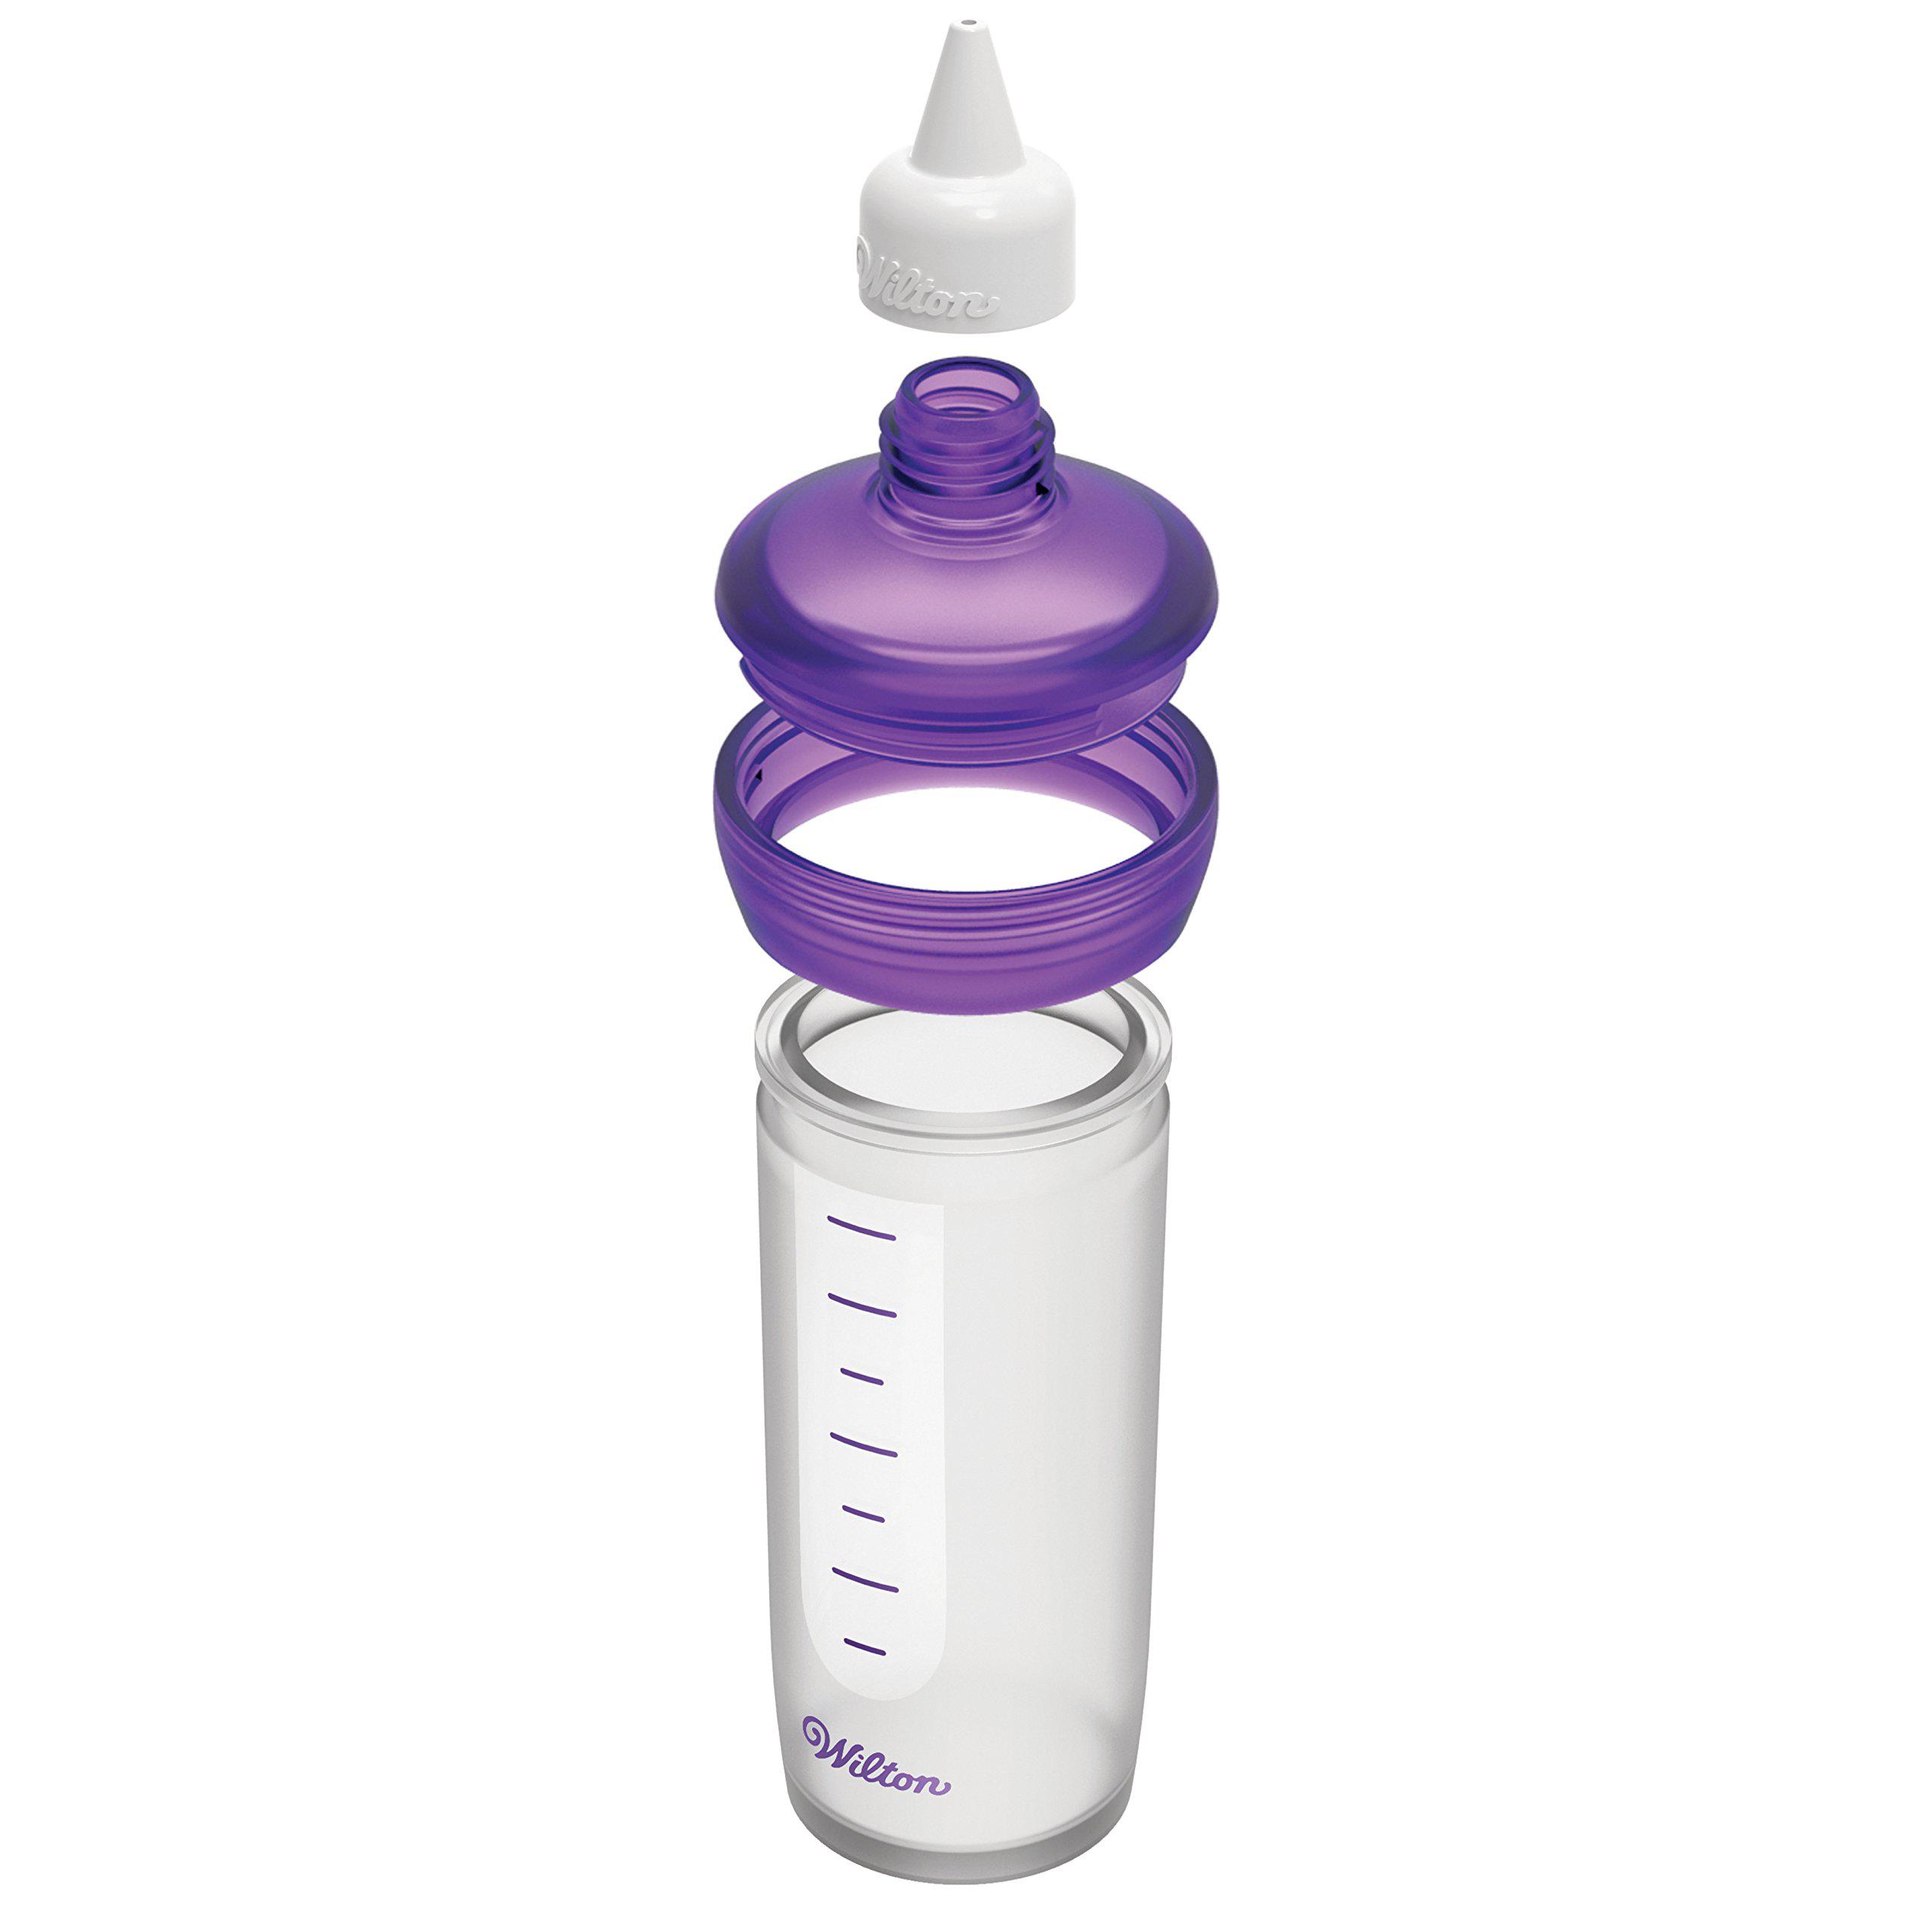 wilton candy melt-n-decorate bottle - candy making supplies